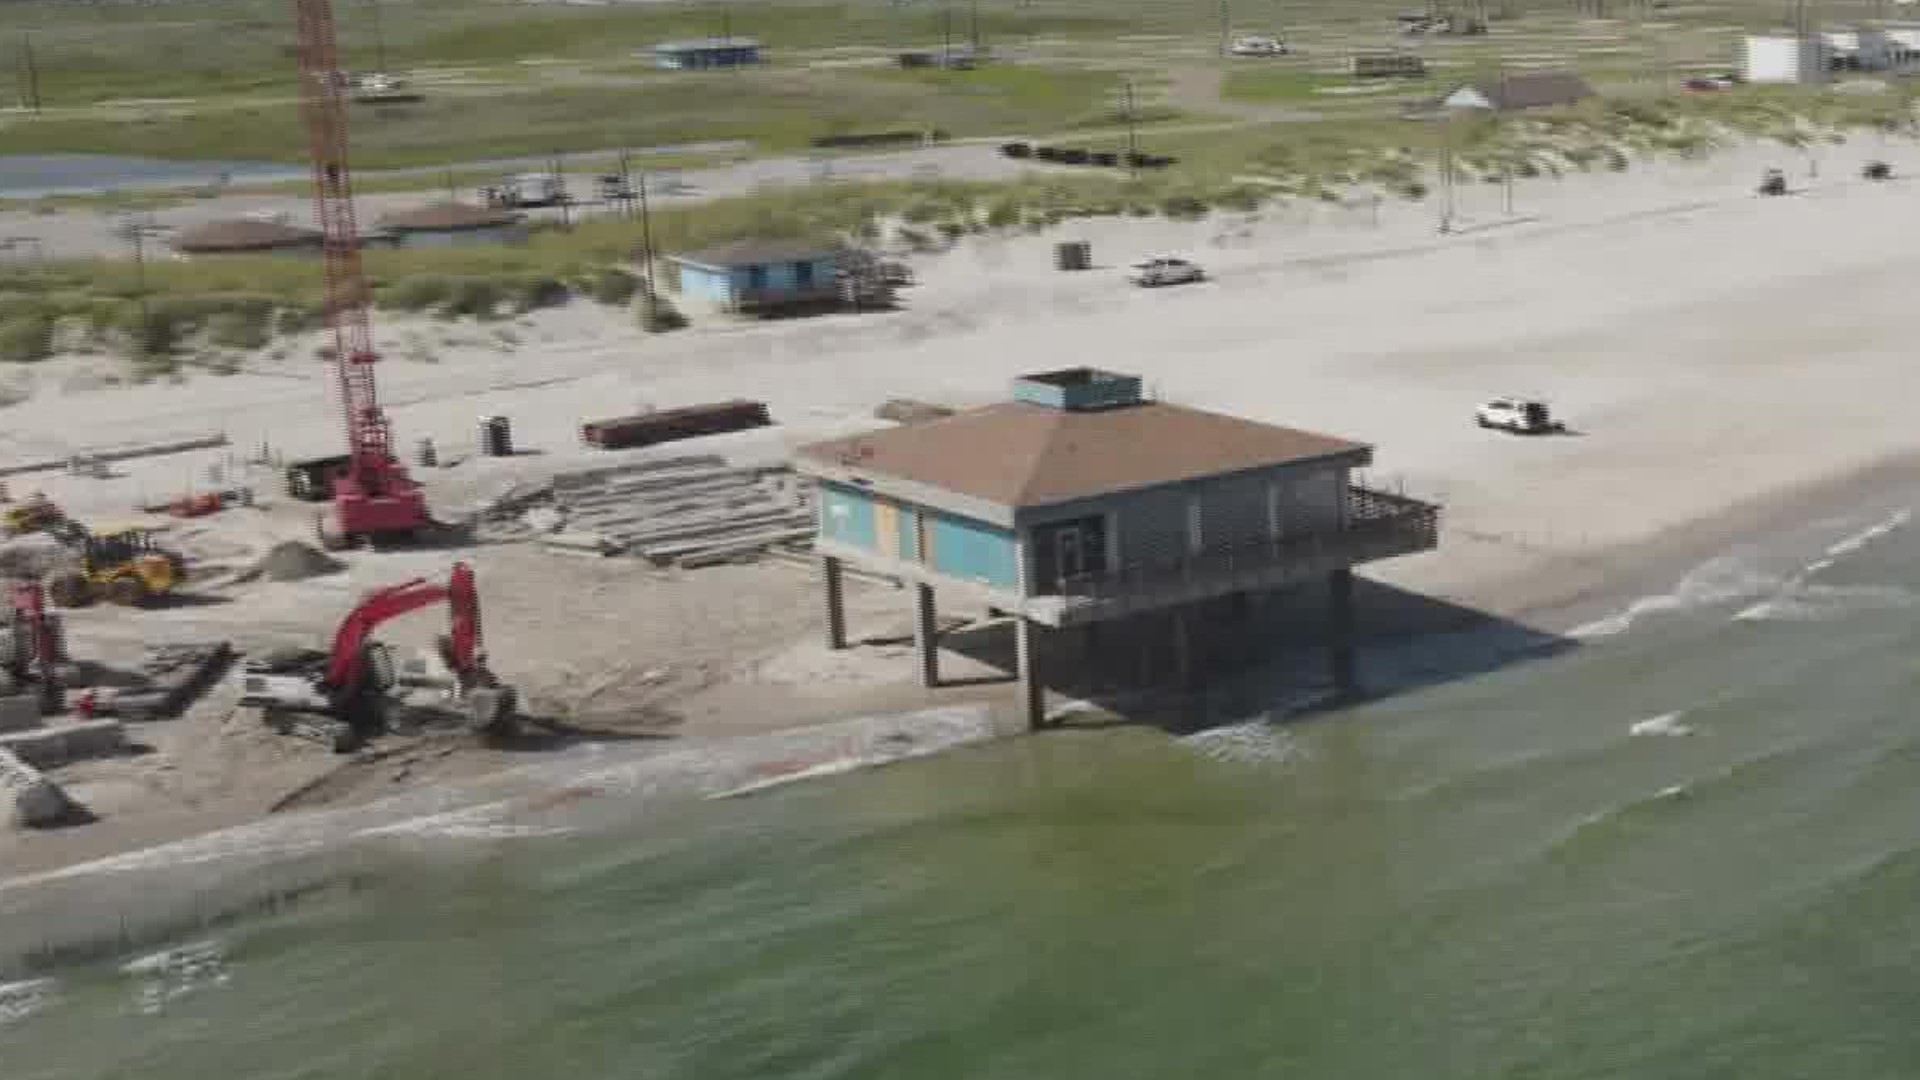 Bob Hall Pier is currently under construction and with any construction site, ESD #2 recommends that folks stay clear of the pier.